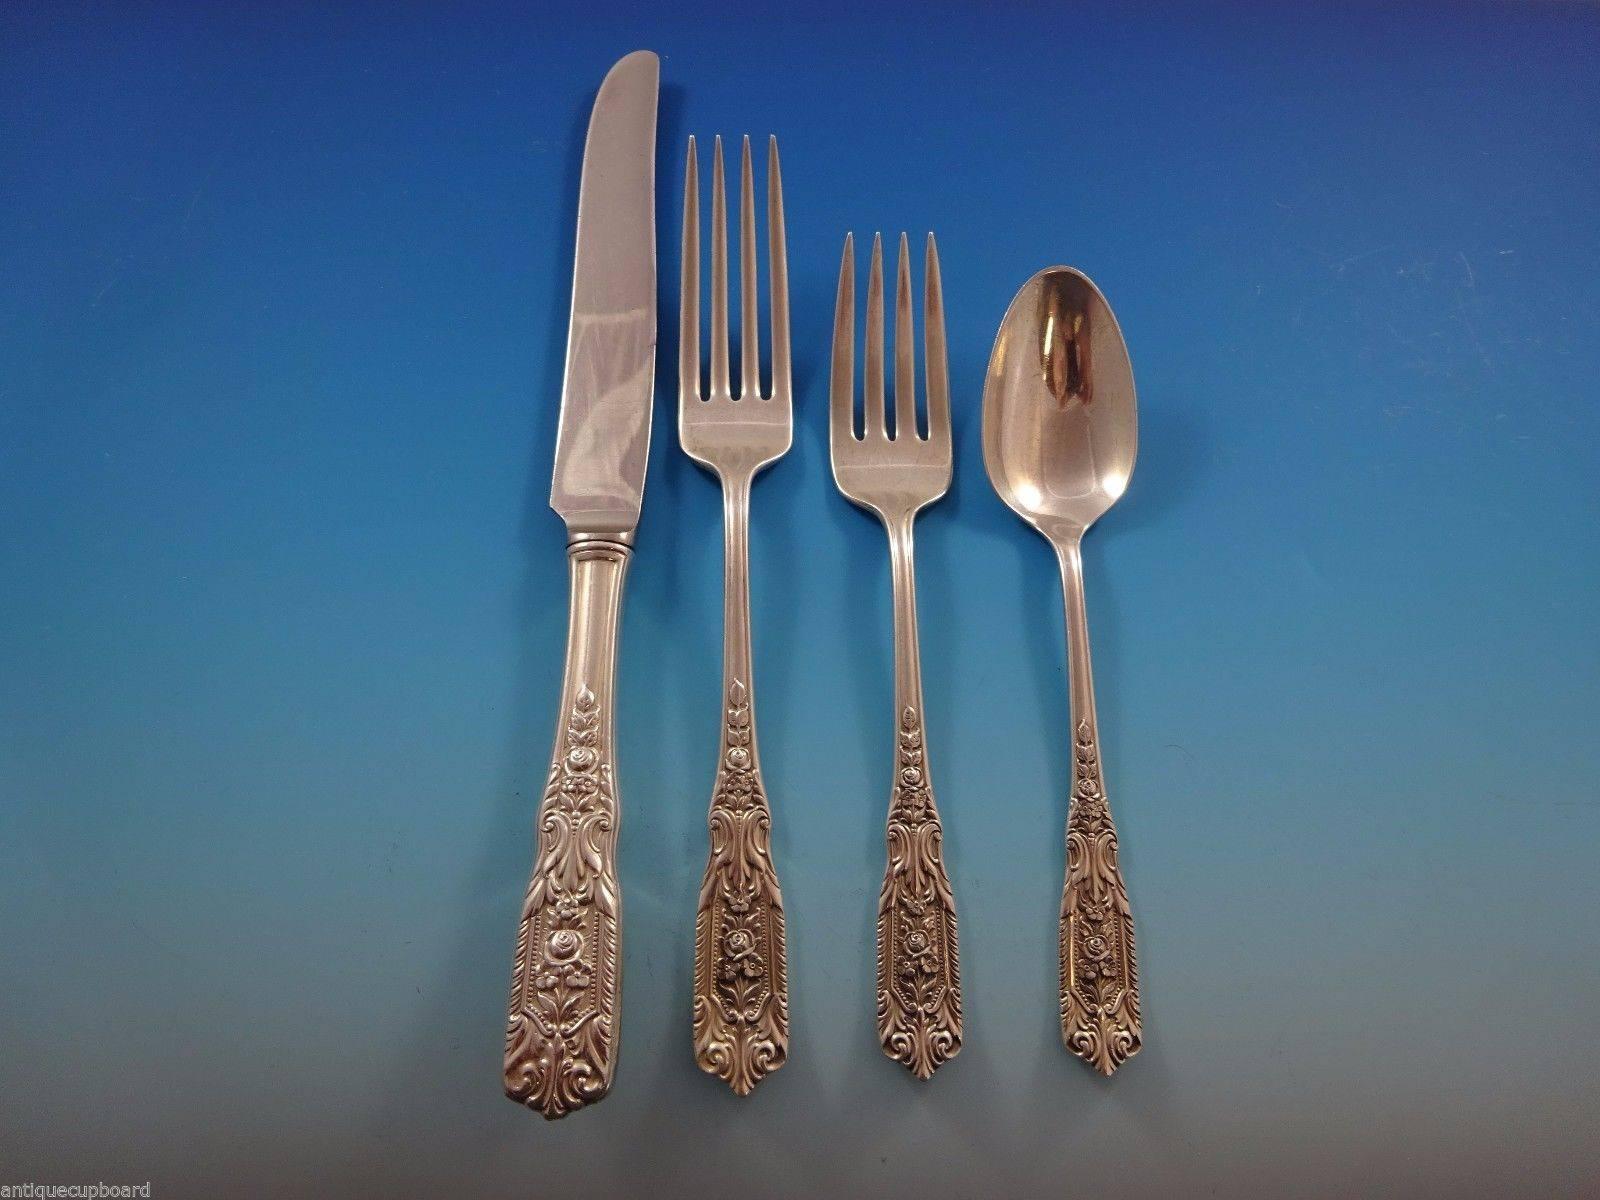 Milburn Rose by Westmorland sterling silver flatware set of 50 pieces. This set includes:

12 regular knives, 9